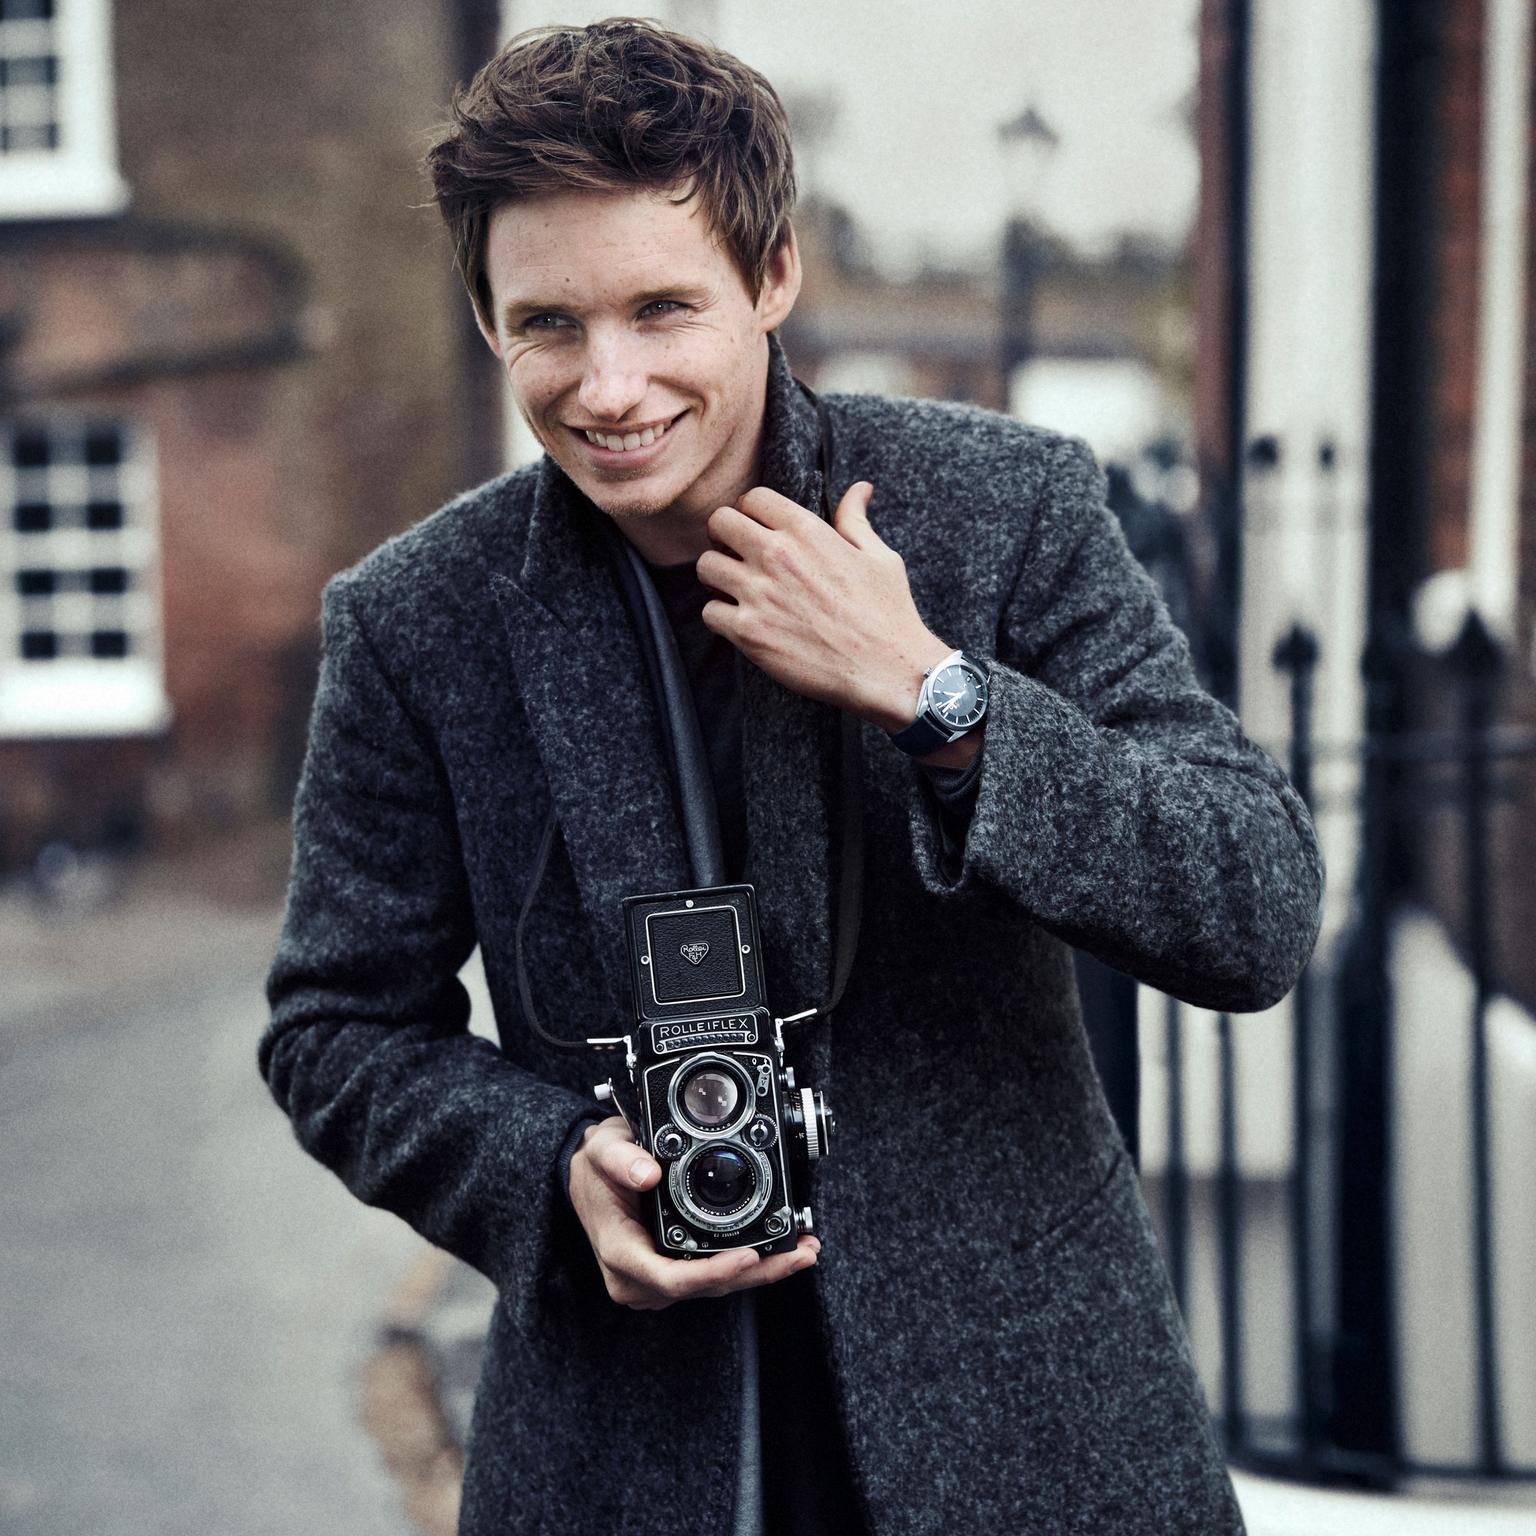 Omega watches and Eddie Redmayne: two 